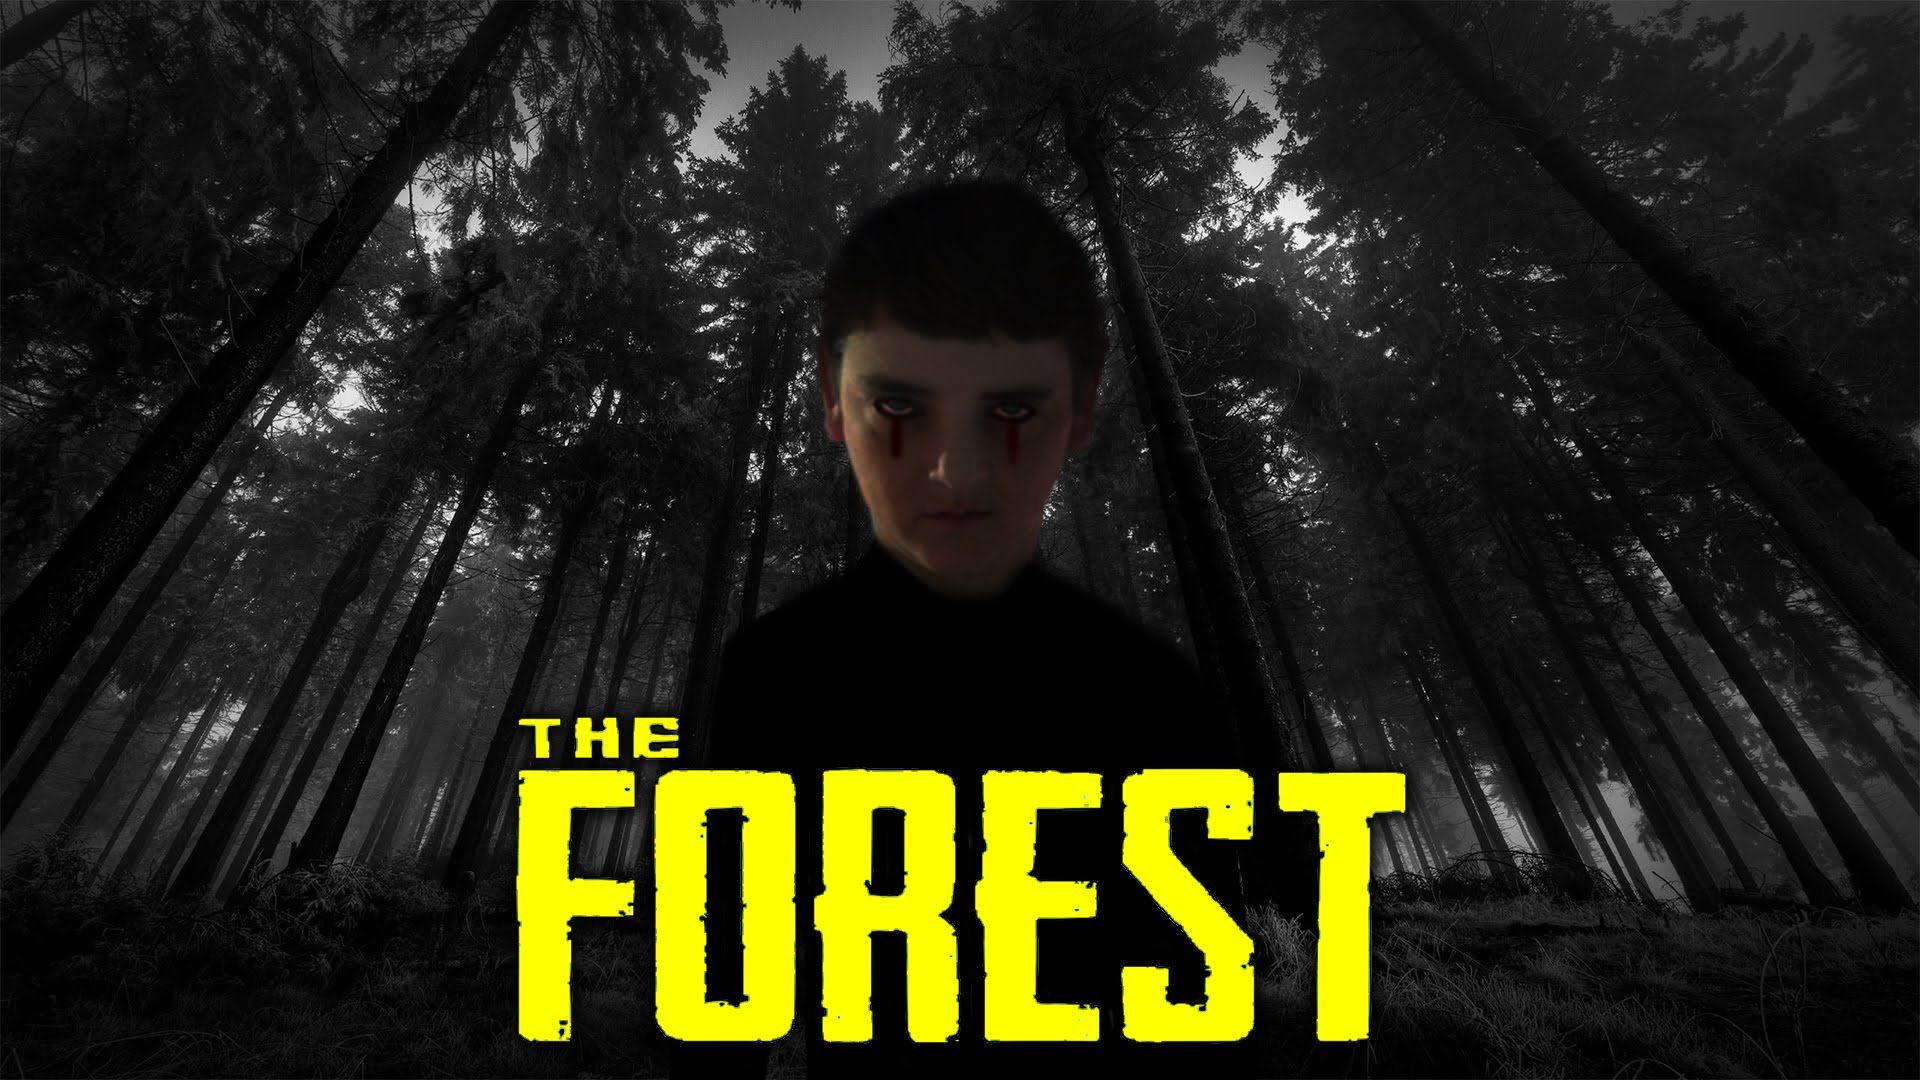 The Forest wallpaper, Movie, HQ The Forest pictureK Wallpaper 2019